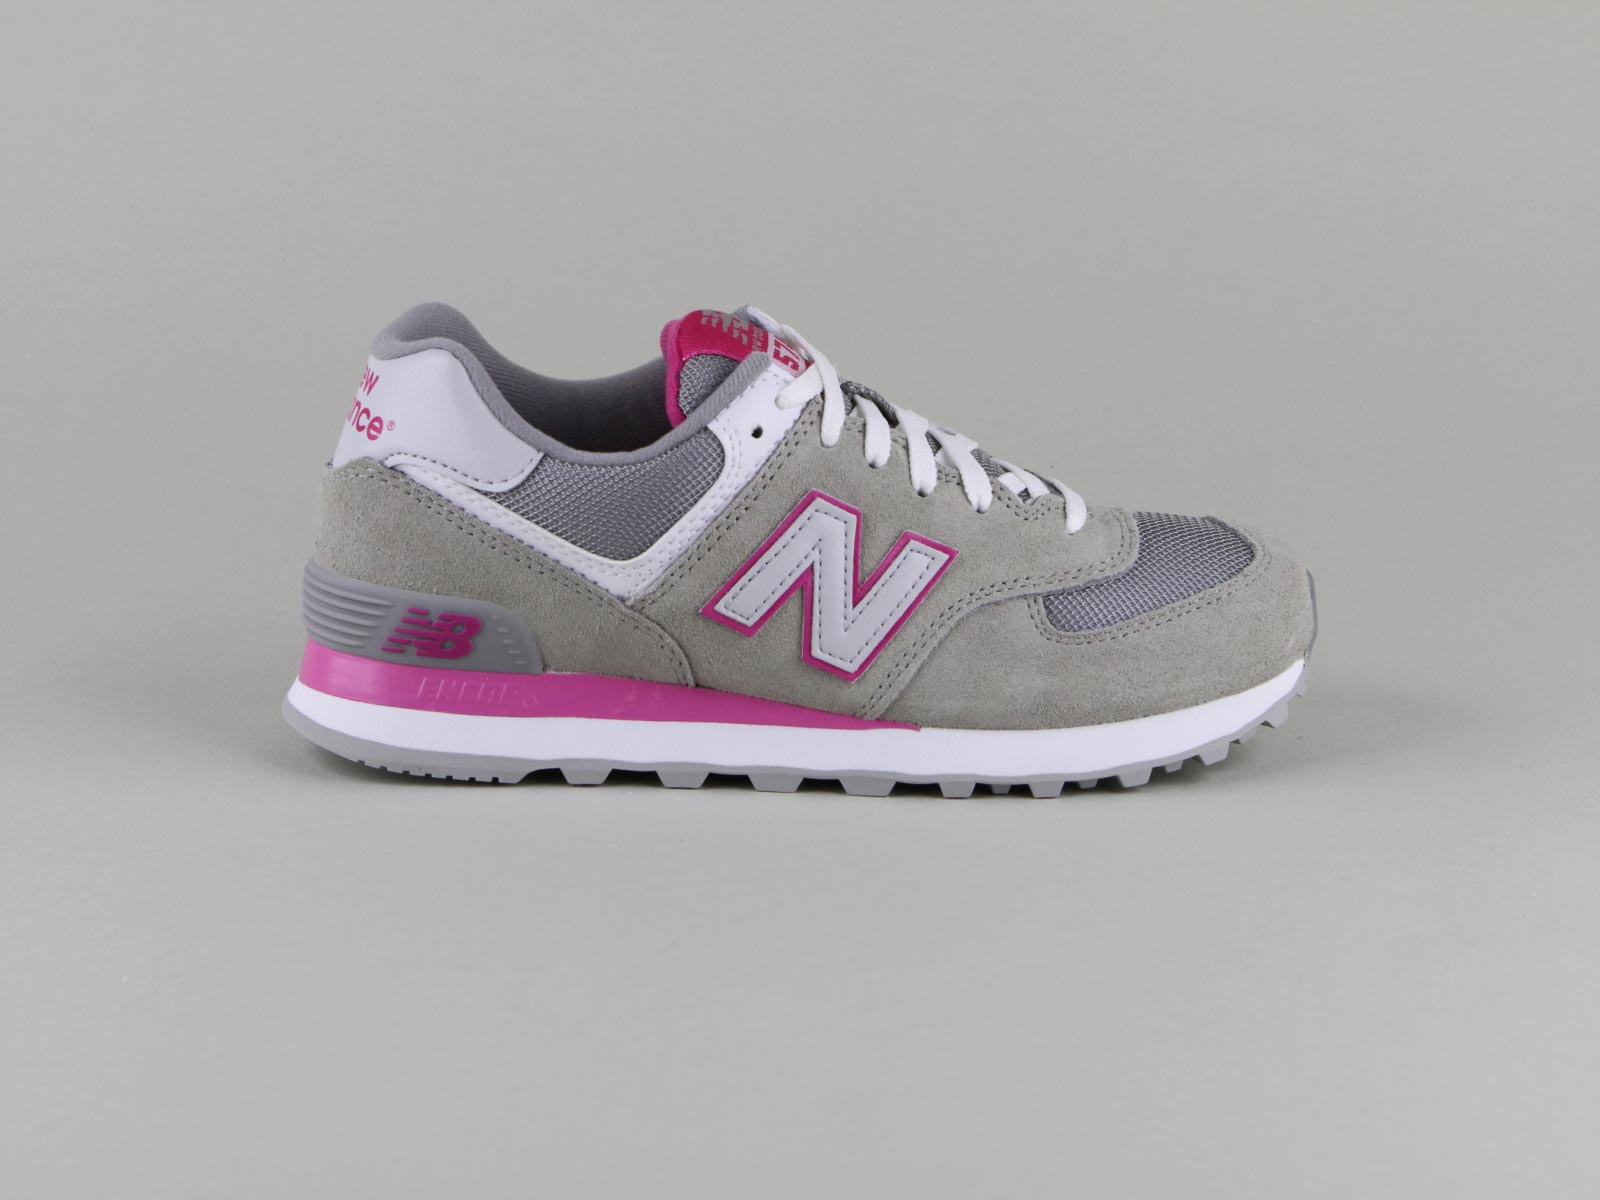 new balance lacets rose